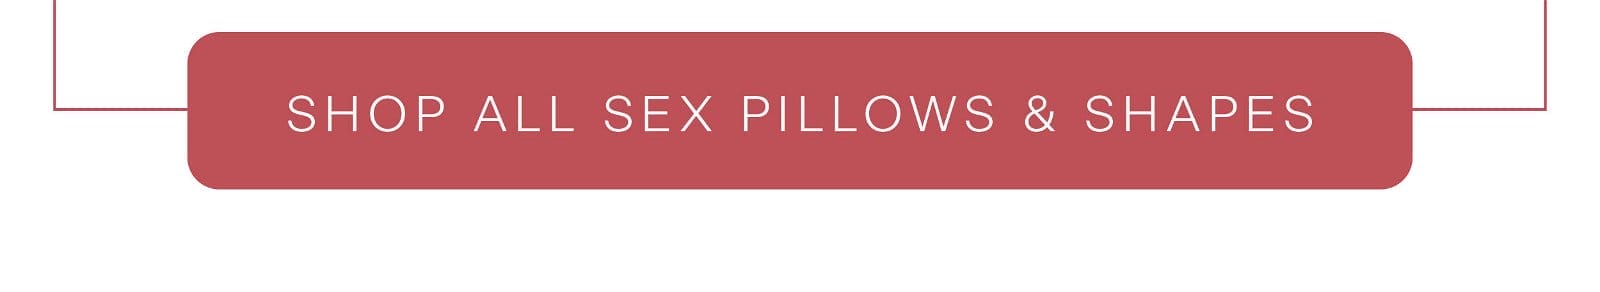 Shop all sex pillows and shapes